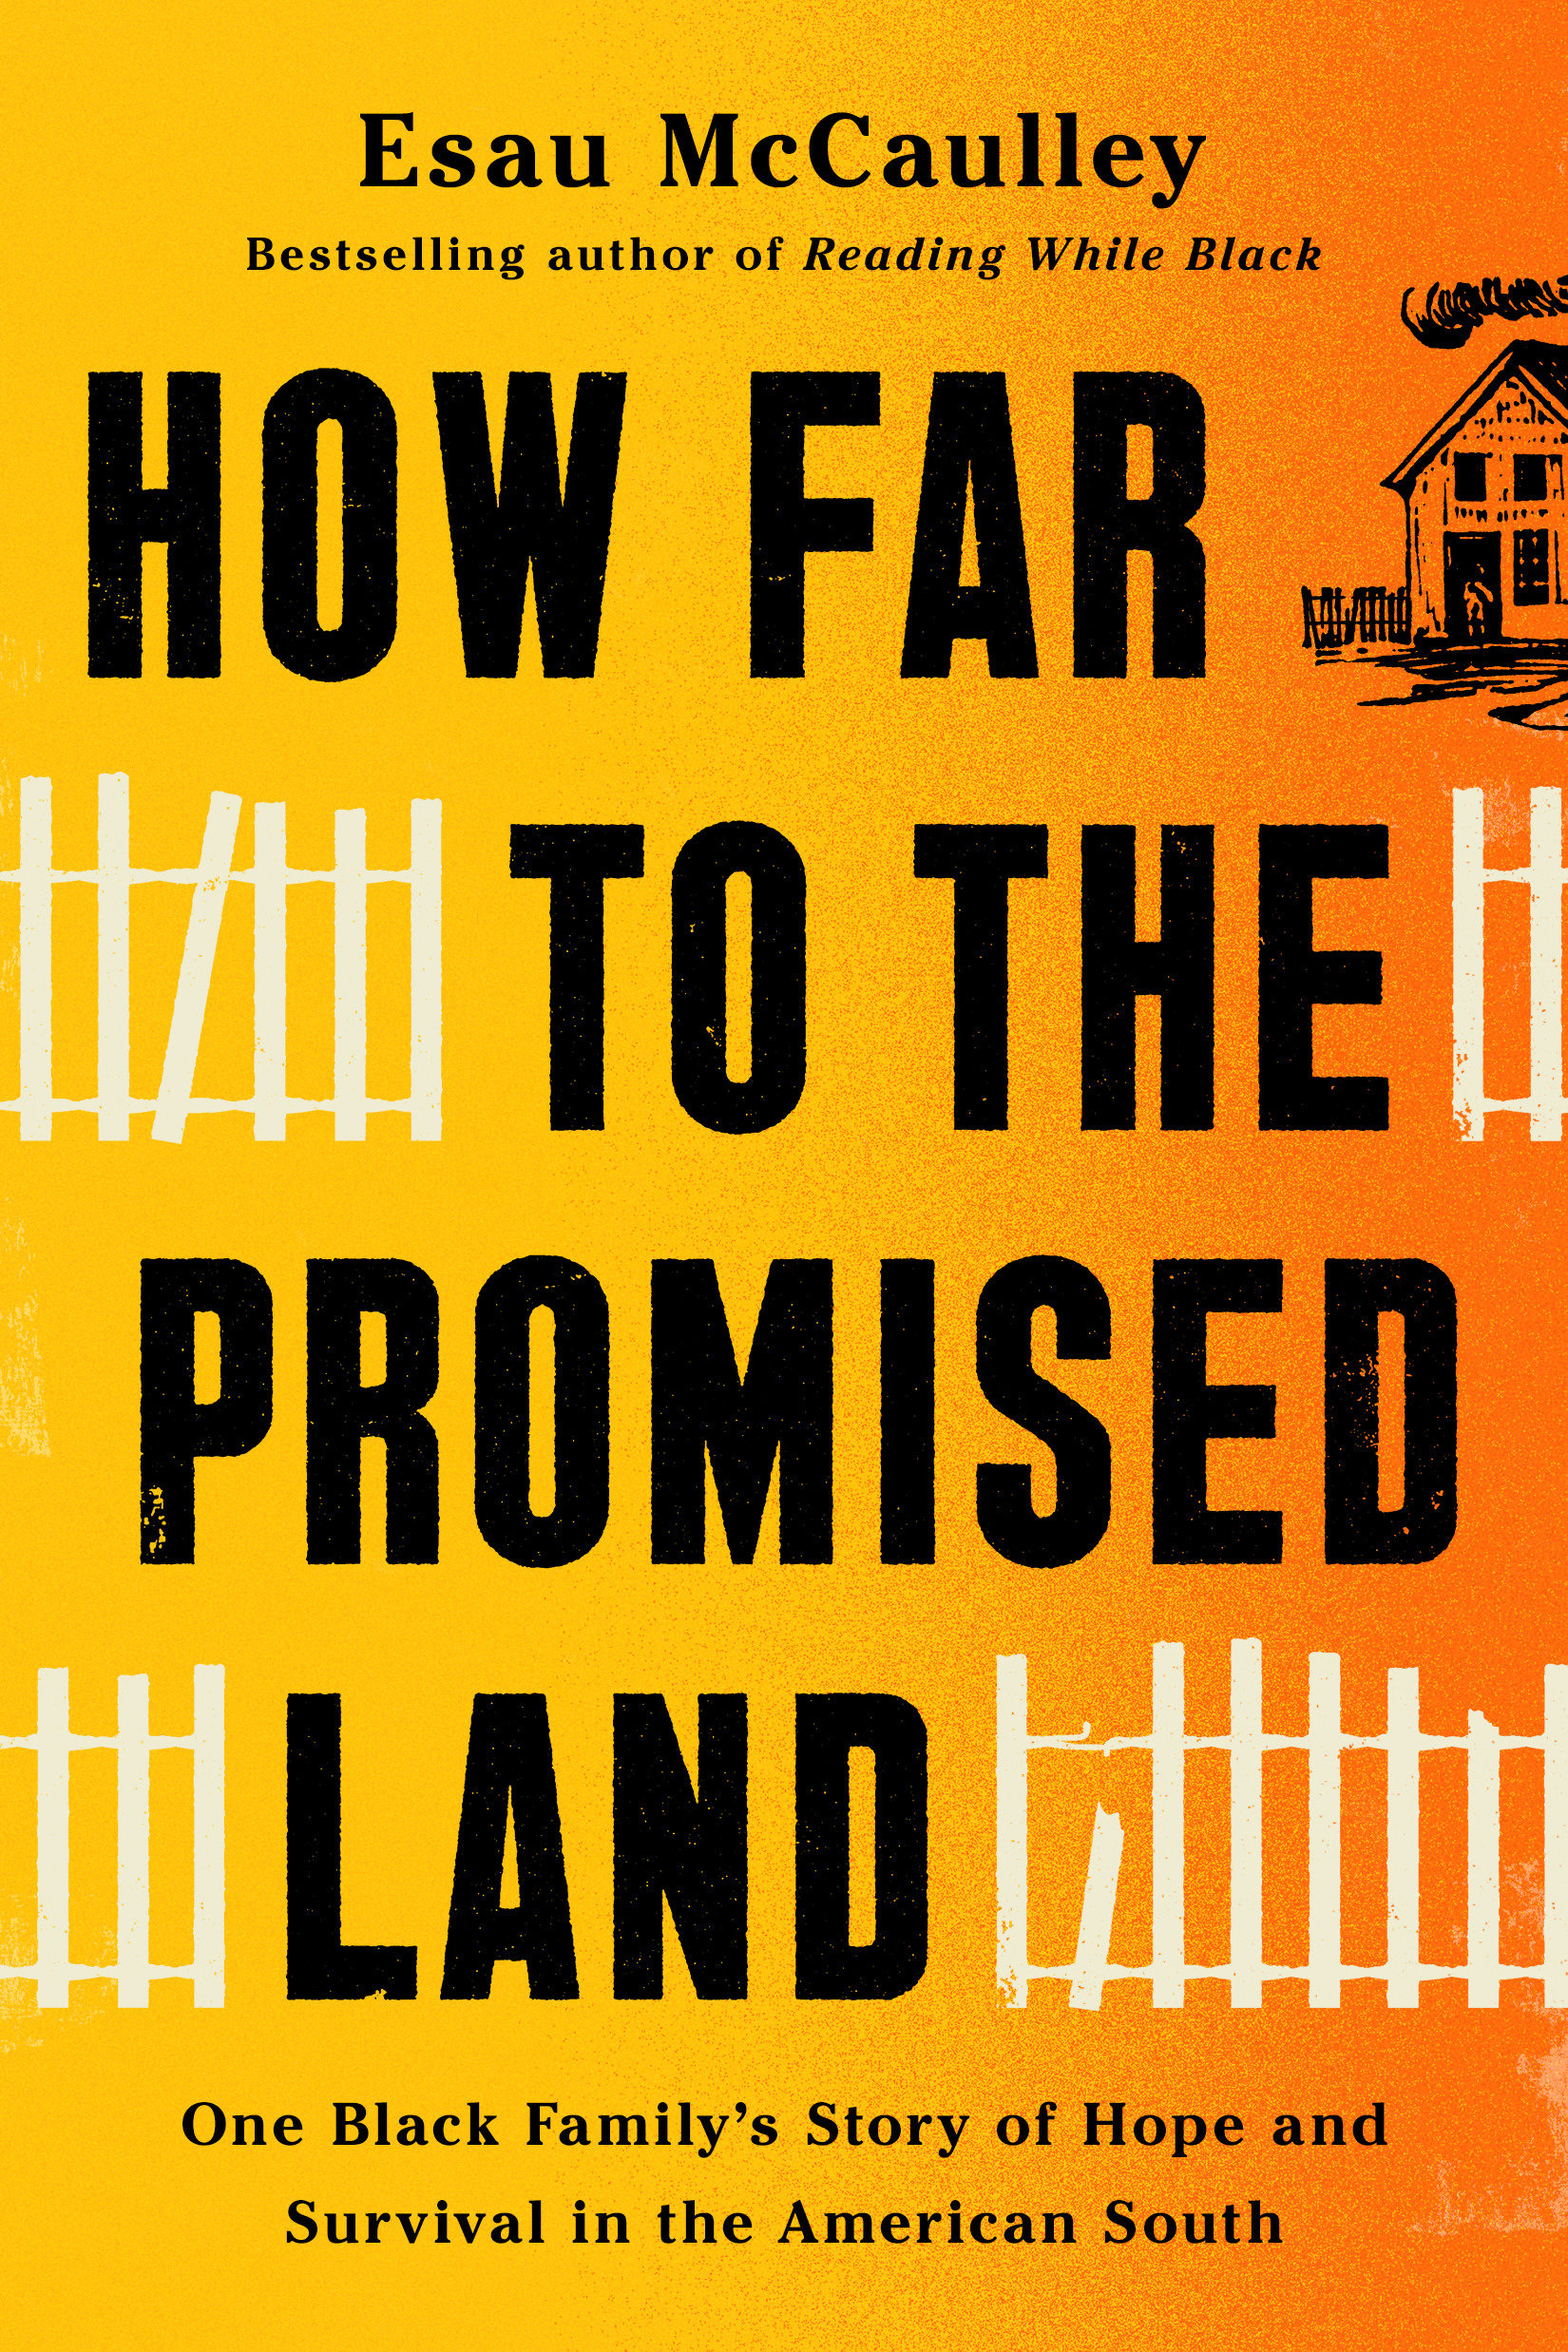 How Far To The Promised Land (Hardcover Book)